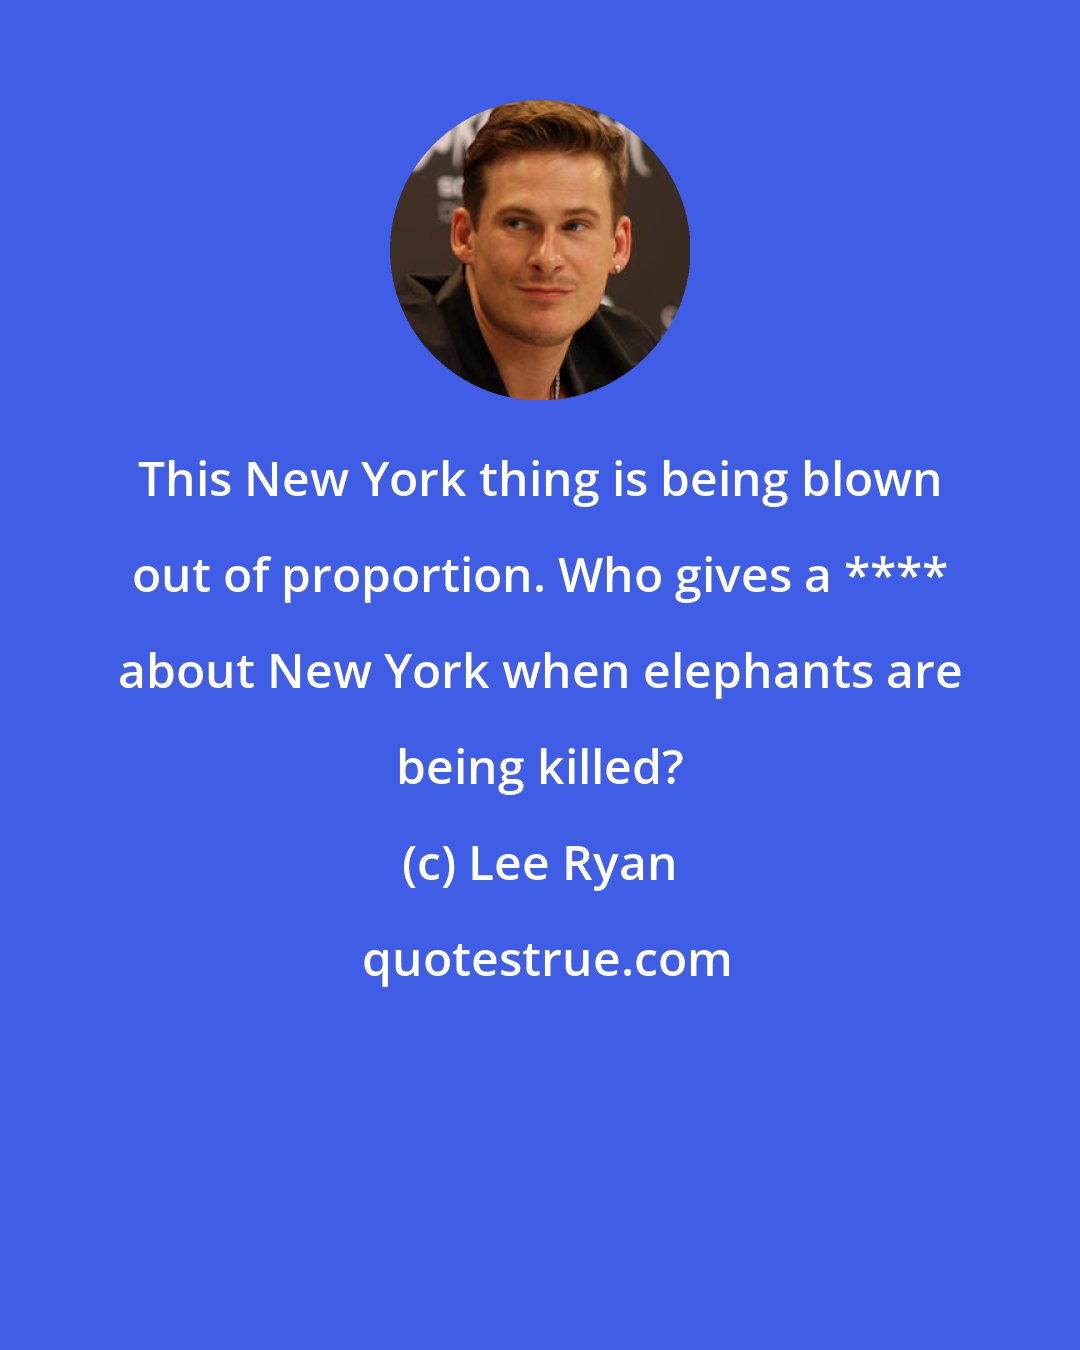 Lee Ryan: This New York thing is being blown out of proportion. Who gives a **** about New York when elephants are being killed?